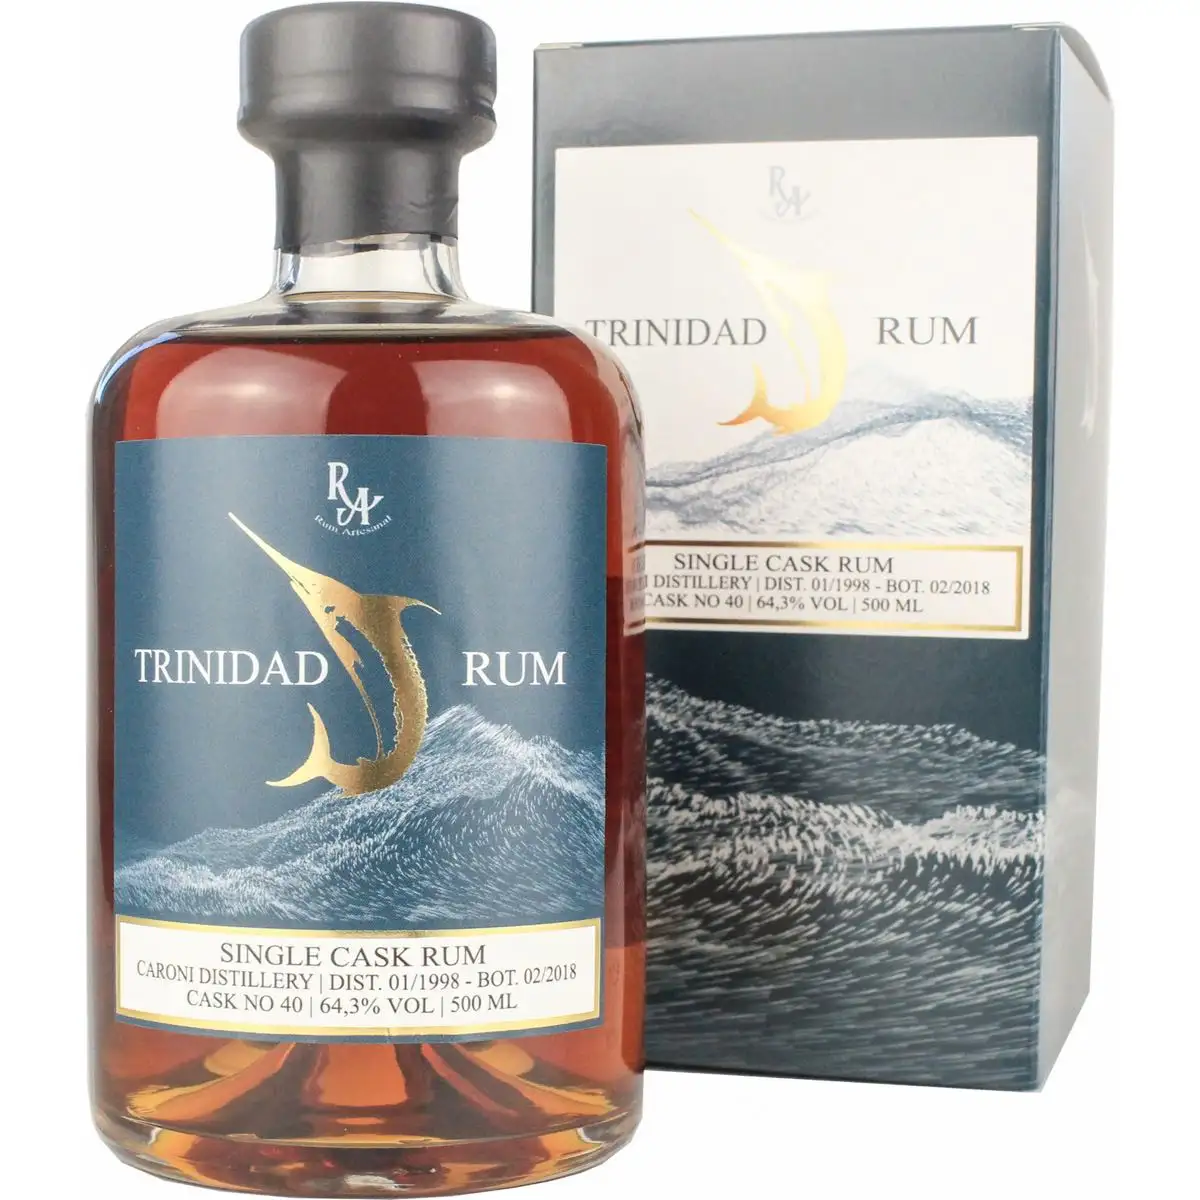 Image of the front of the bottle of the rum Rum Artesanal Trinidad Rum HTR